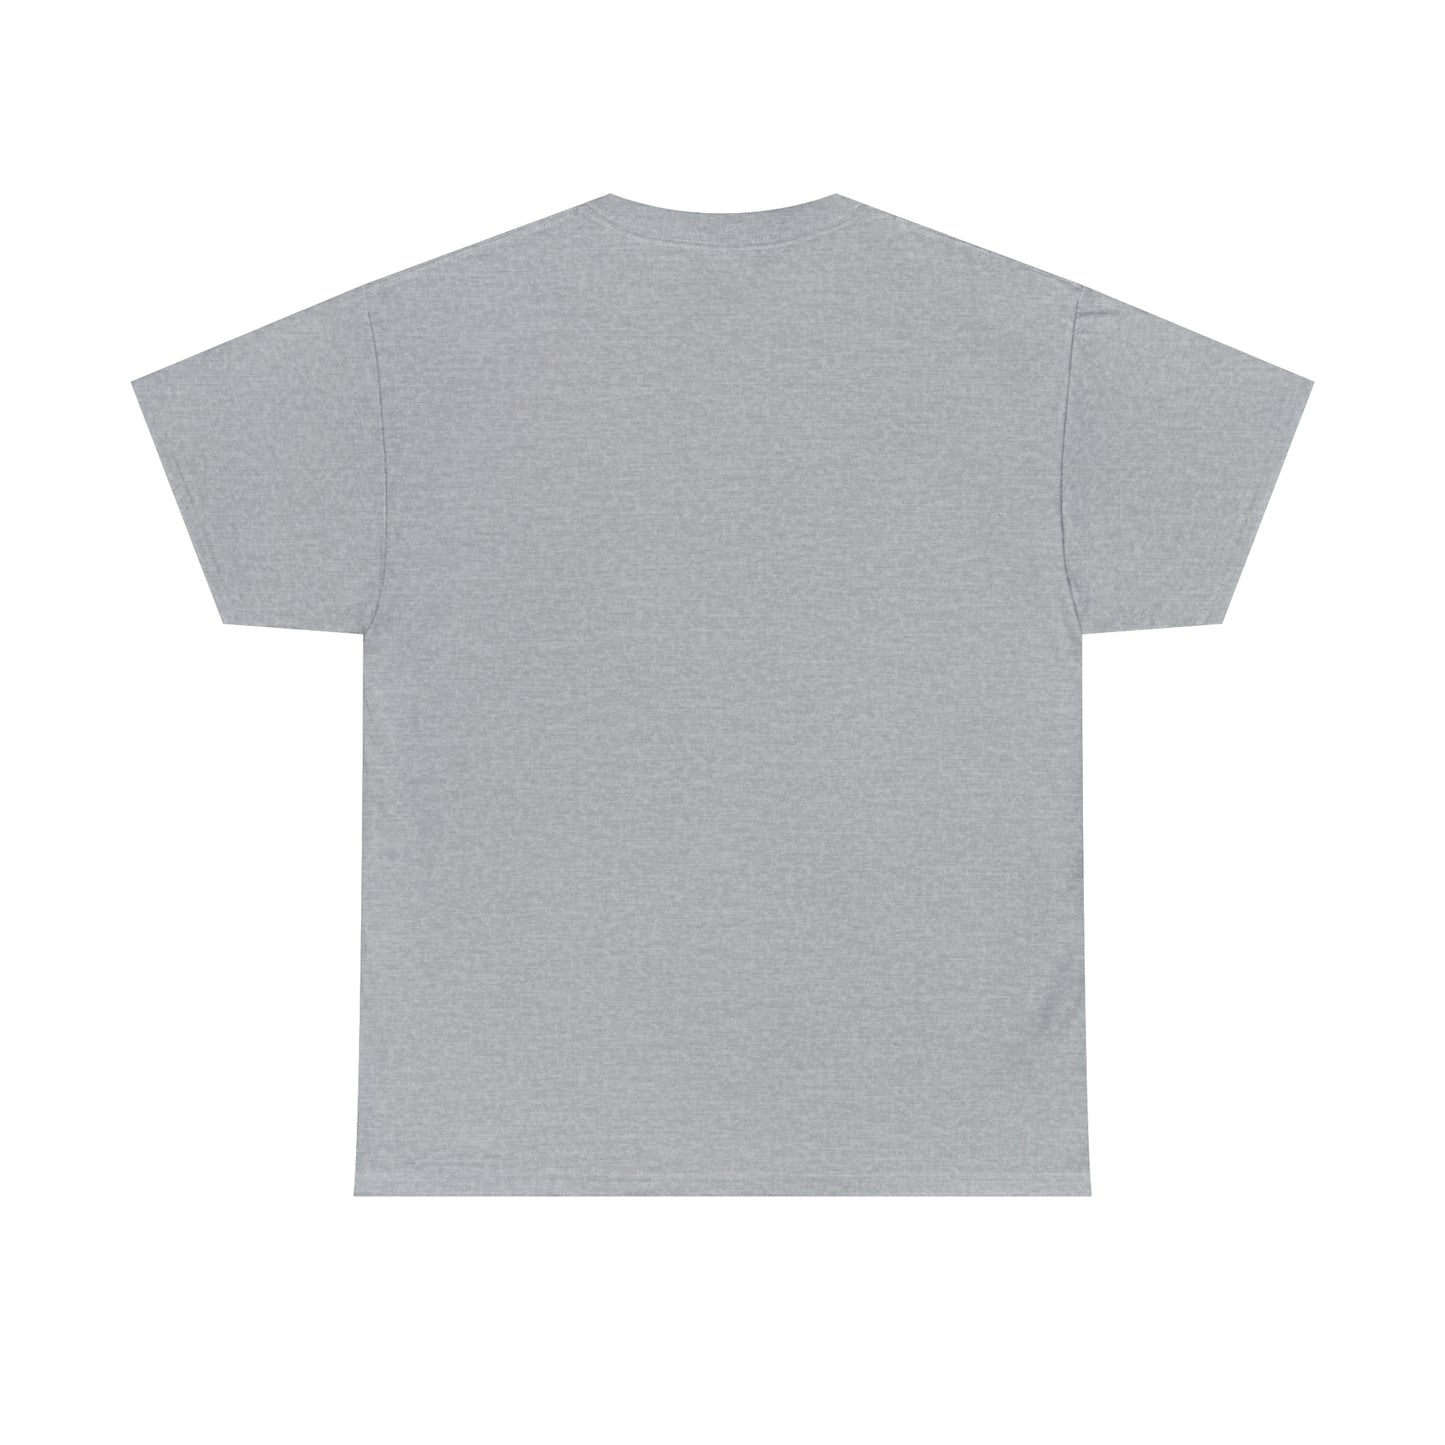 Flat back view of the Sport Grey t-shirt